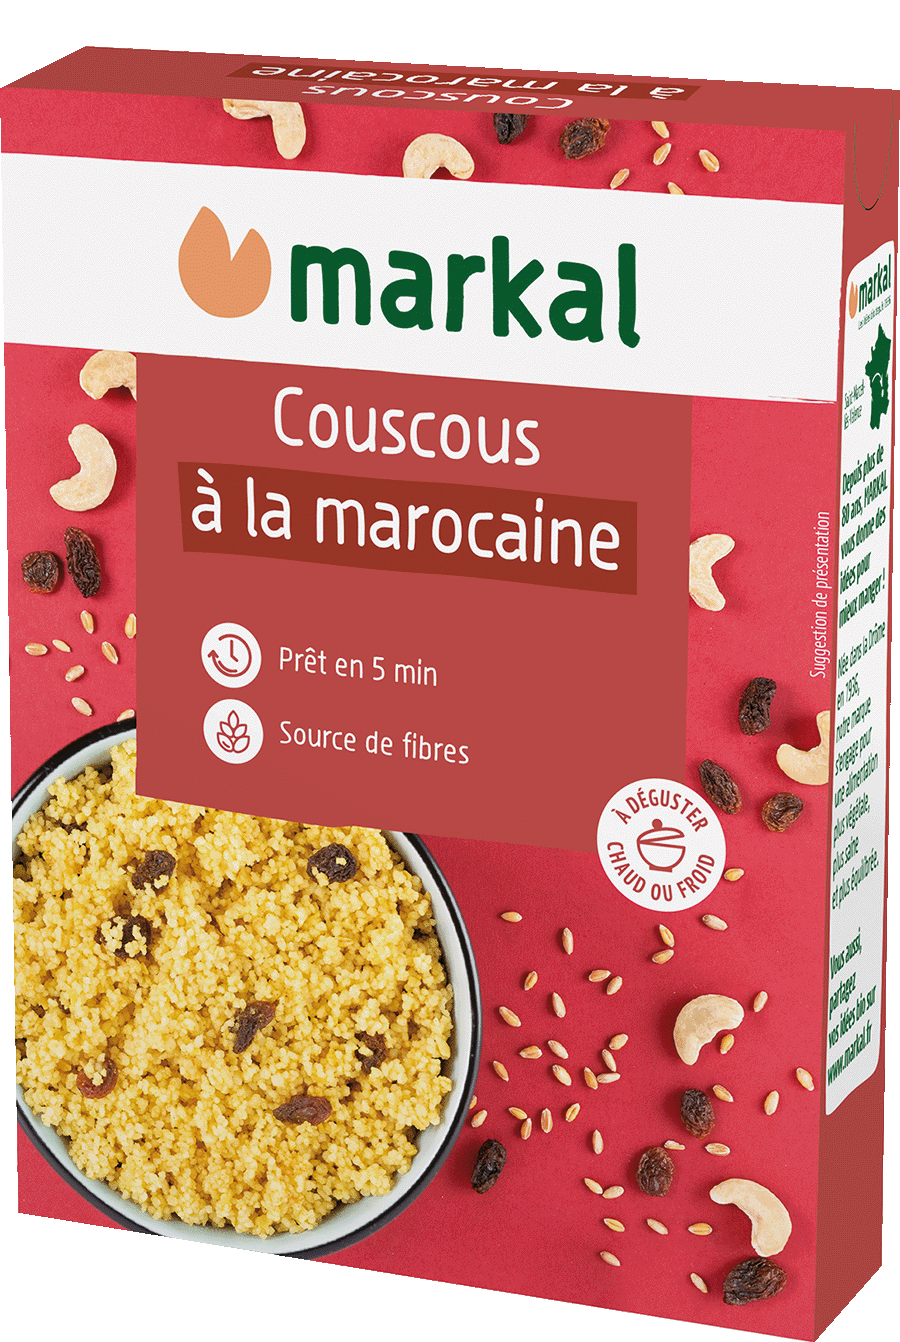 Moroccan-style couscous